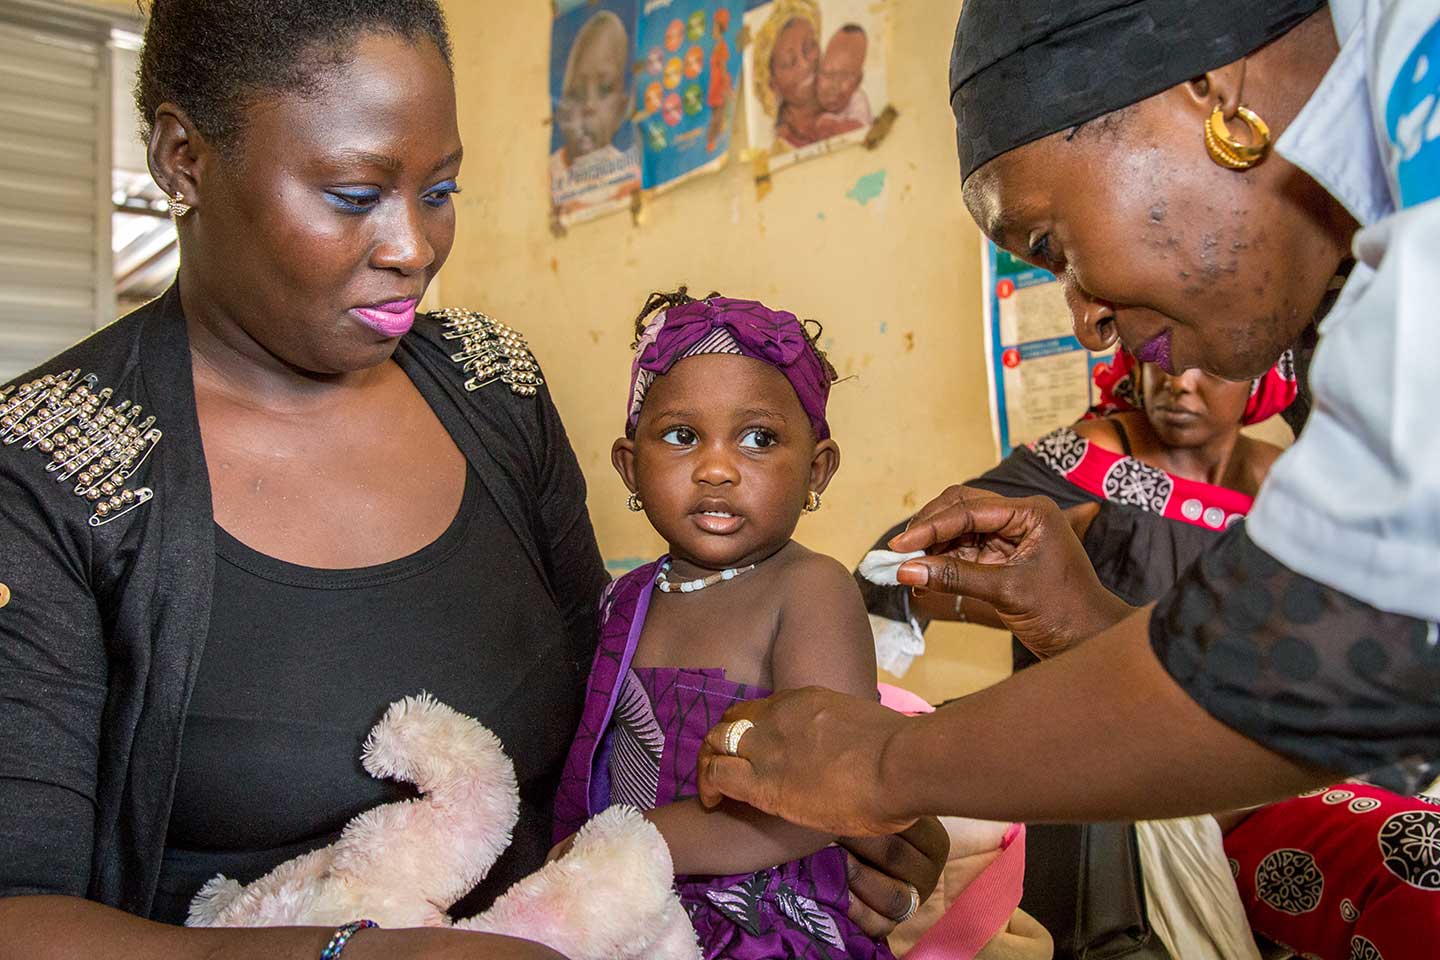 17 month-old Bilkhiss Diop has been brought in today by her mother, Oumou Hann (left), for the second dose of her measles-rubella vaccination. Gavi Special Envoy, Dagfinn Høybråten, joined the vaccination session in Louga district health centre, northern Senegal (September 2018). Mr Høybråten came to see how Senegal is managing to maintain high immunisation rates in more rural settings. Credit: Gavi/2018/Simon Davis